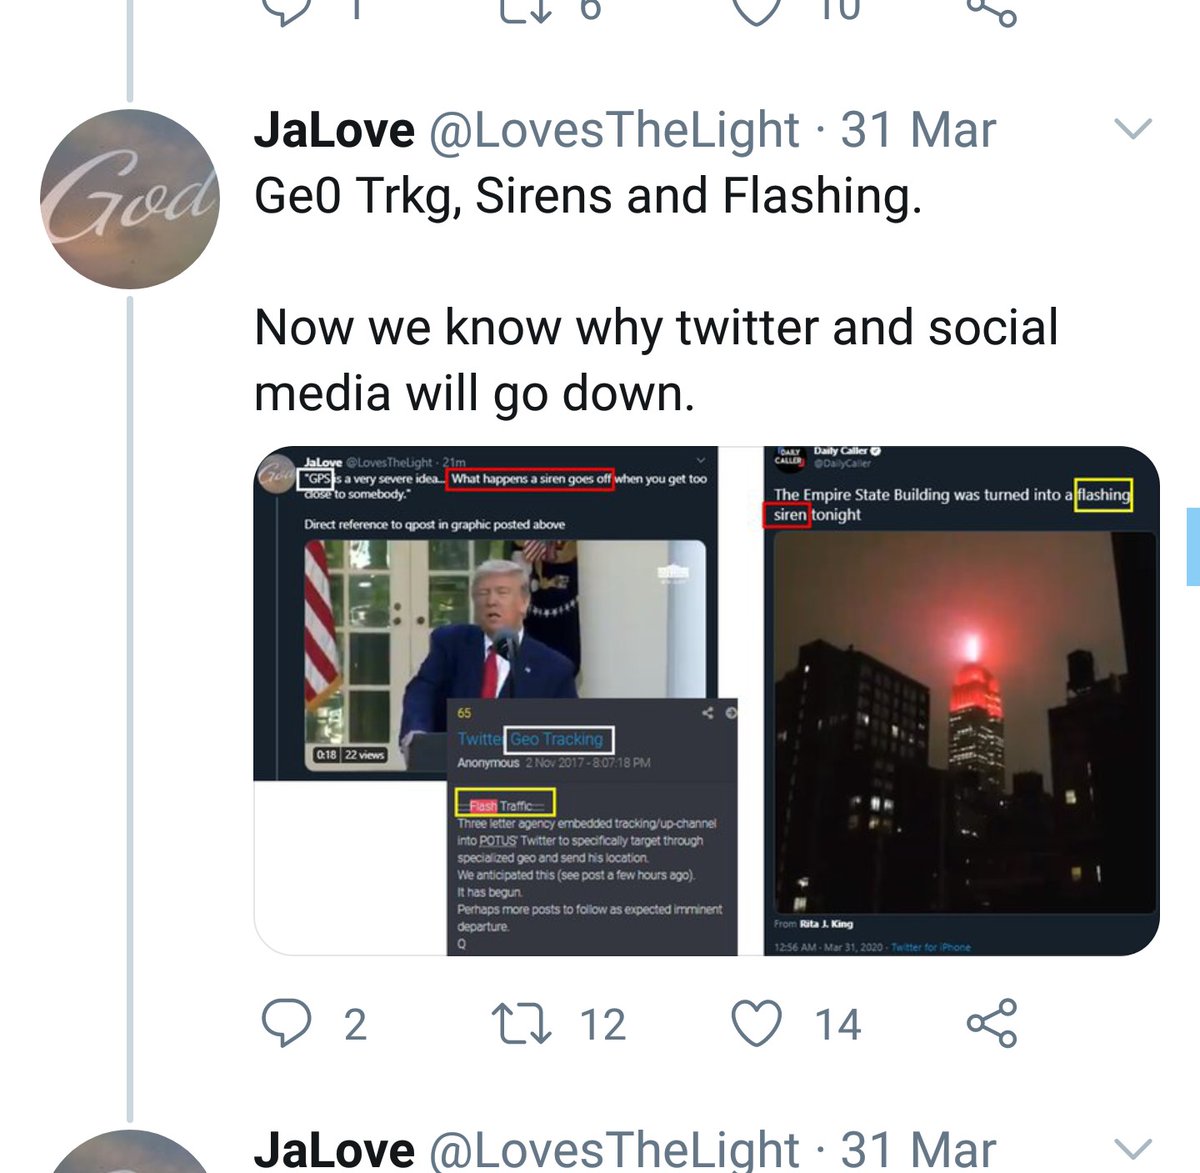 The breadcrumbs here and in the thread linked in it are critical to understanding current events.Geo trkgLess than 10 on 2 hands" 10&2 on the clockSaviors of mankind https://twitter.com/LovesTheLight/status/1312179639867985921?s=19